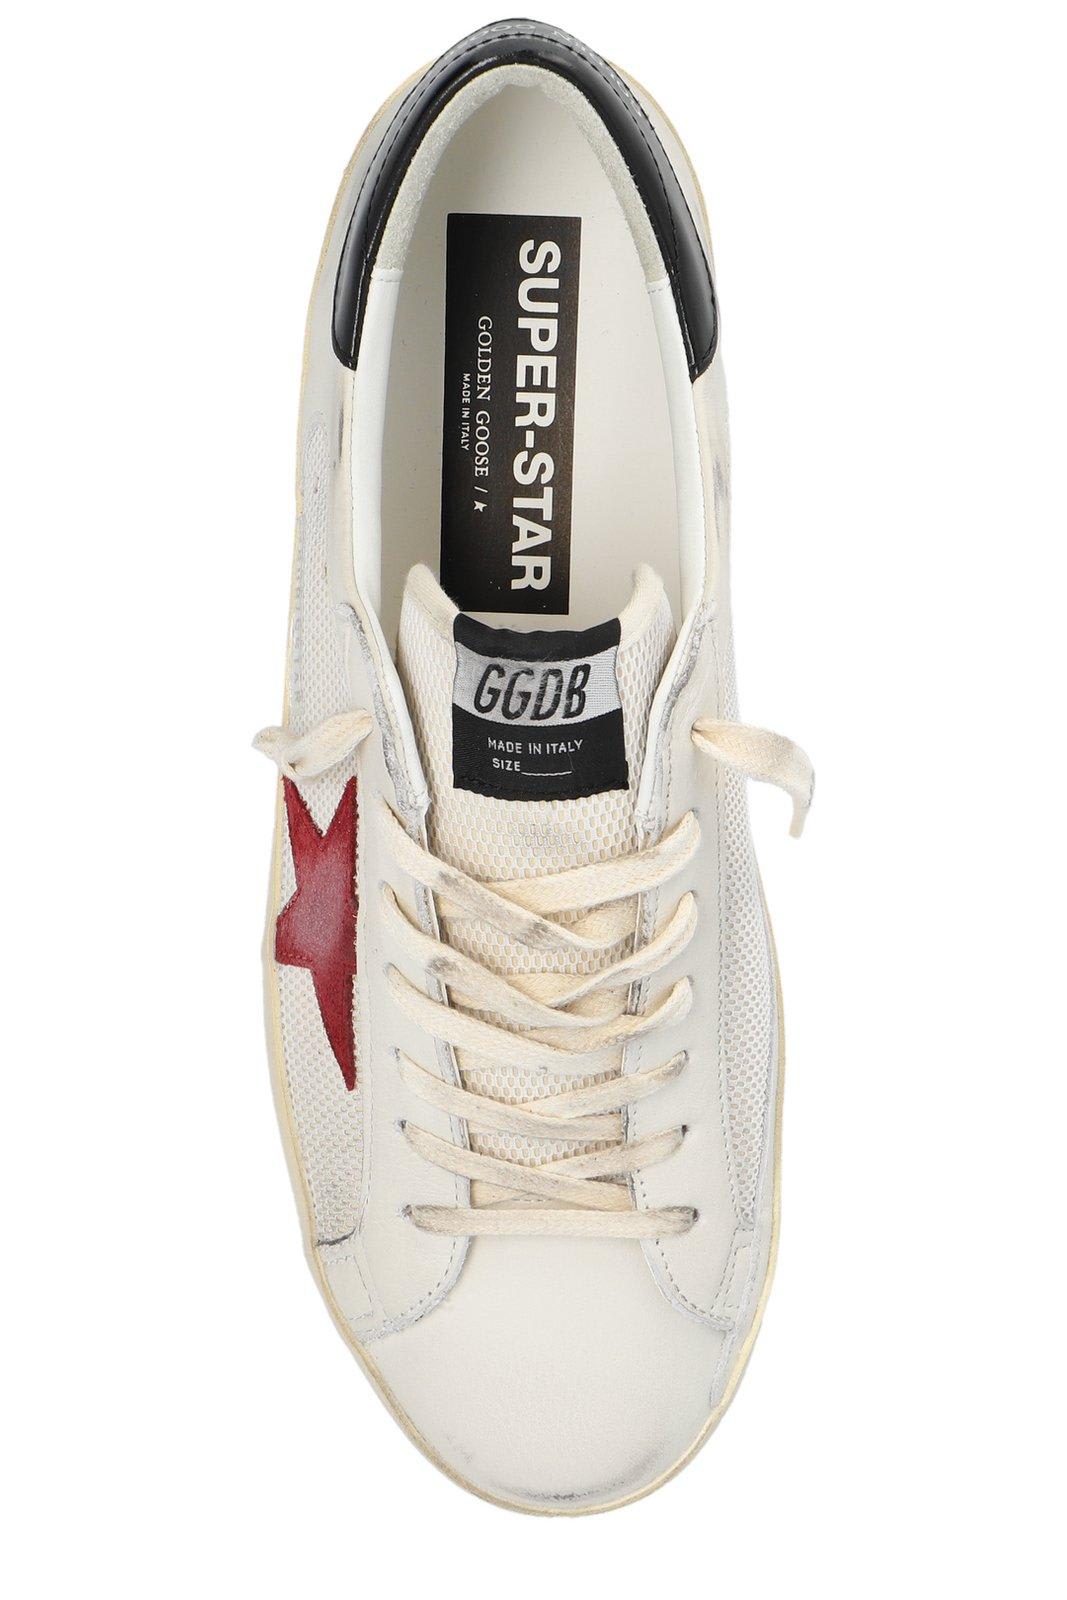 Shop Golden Goose Superstar Lace-up Sneakers In White/pomegranate/